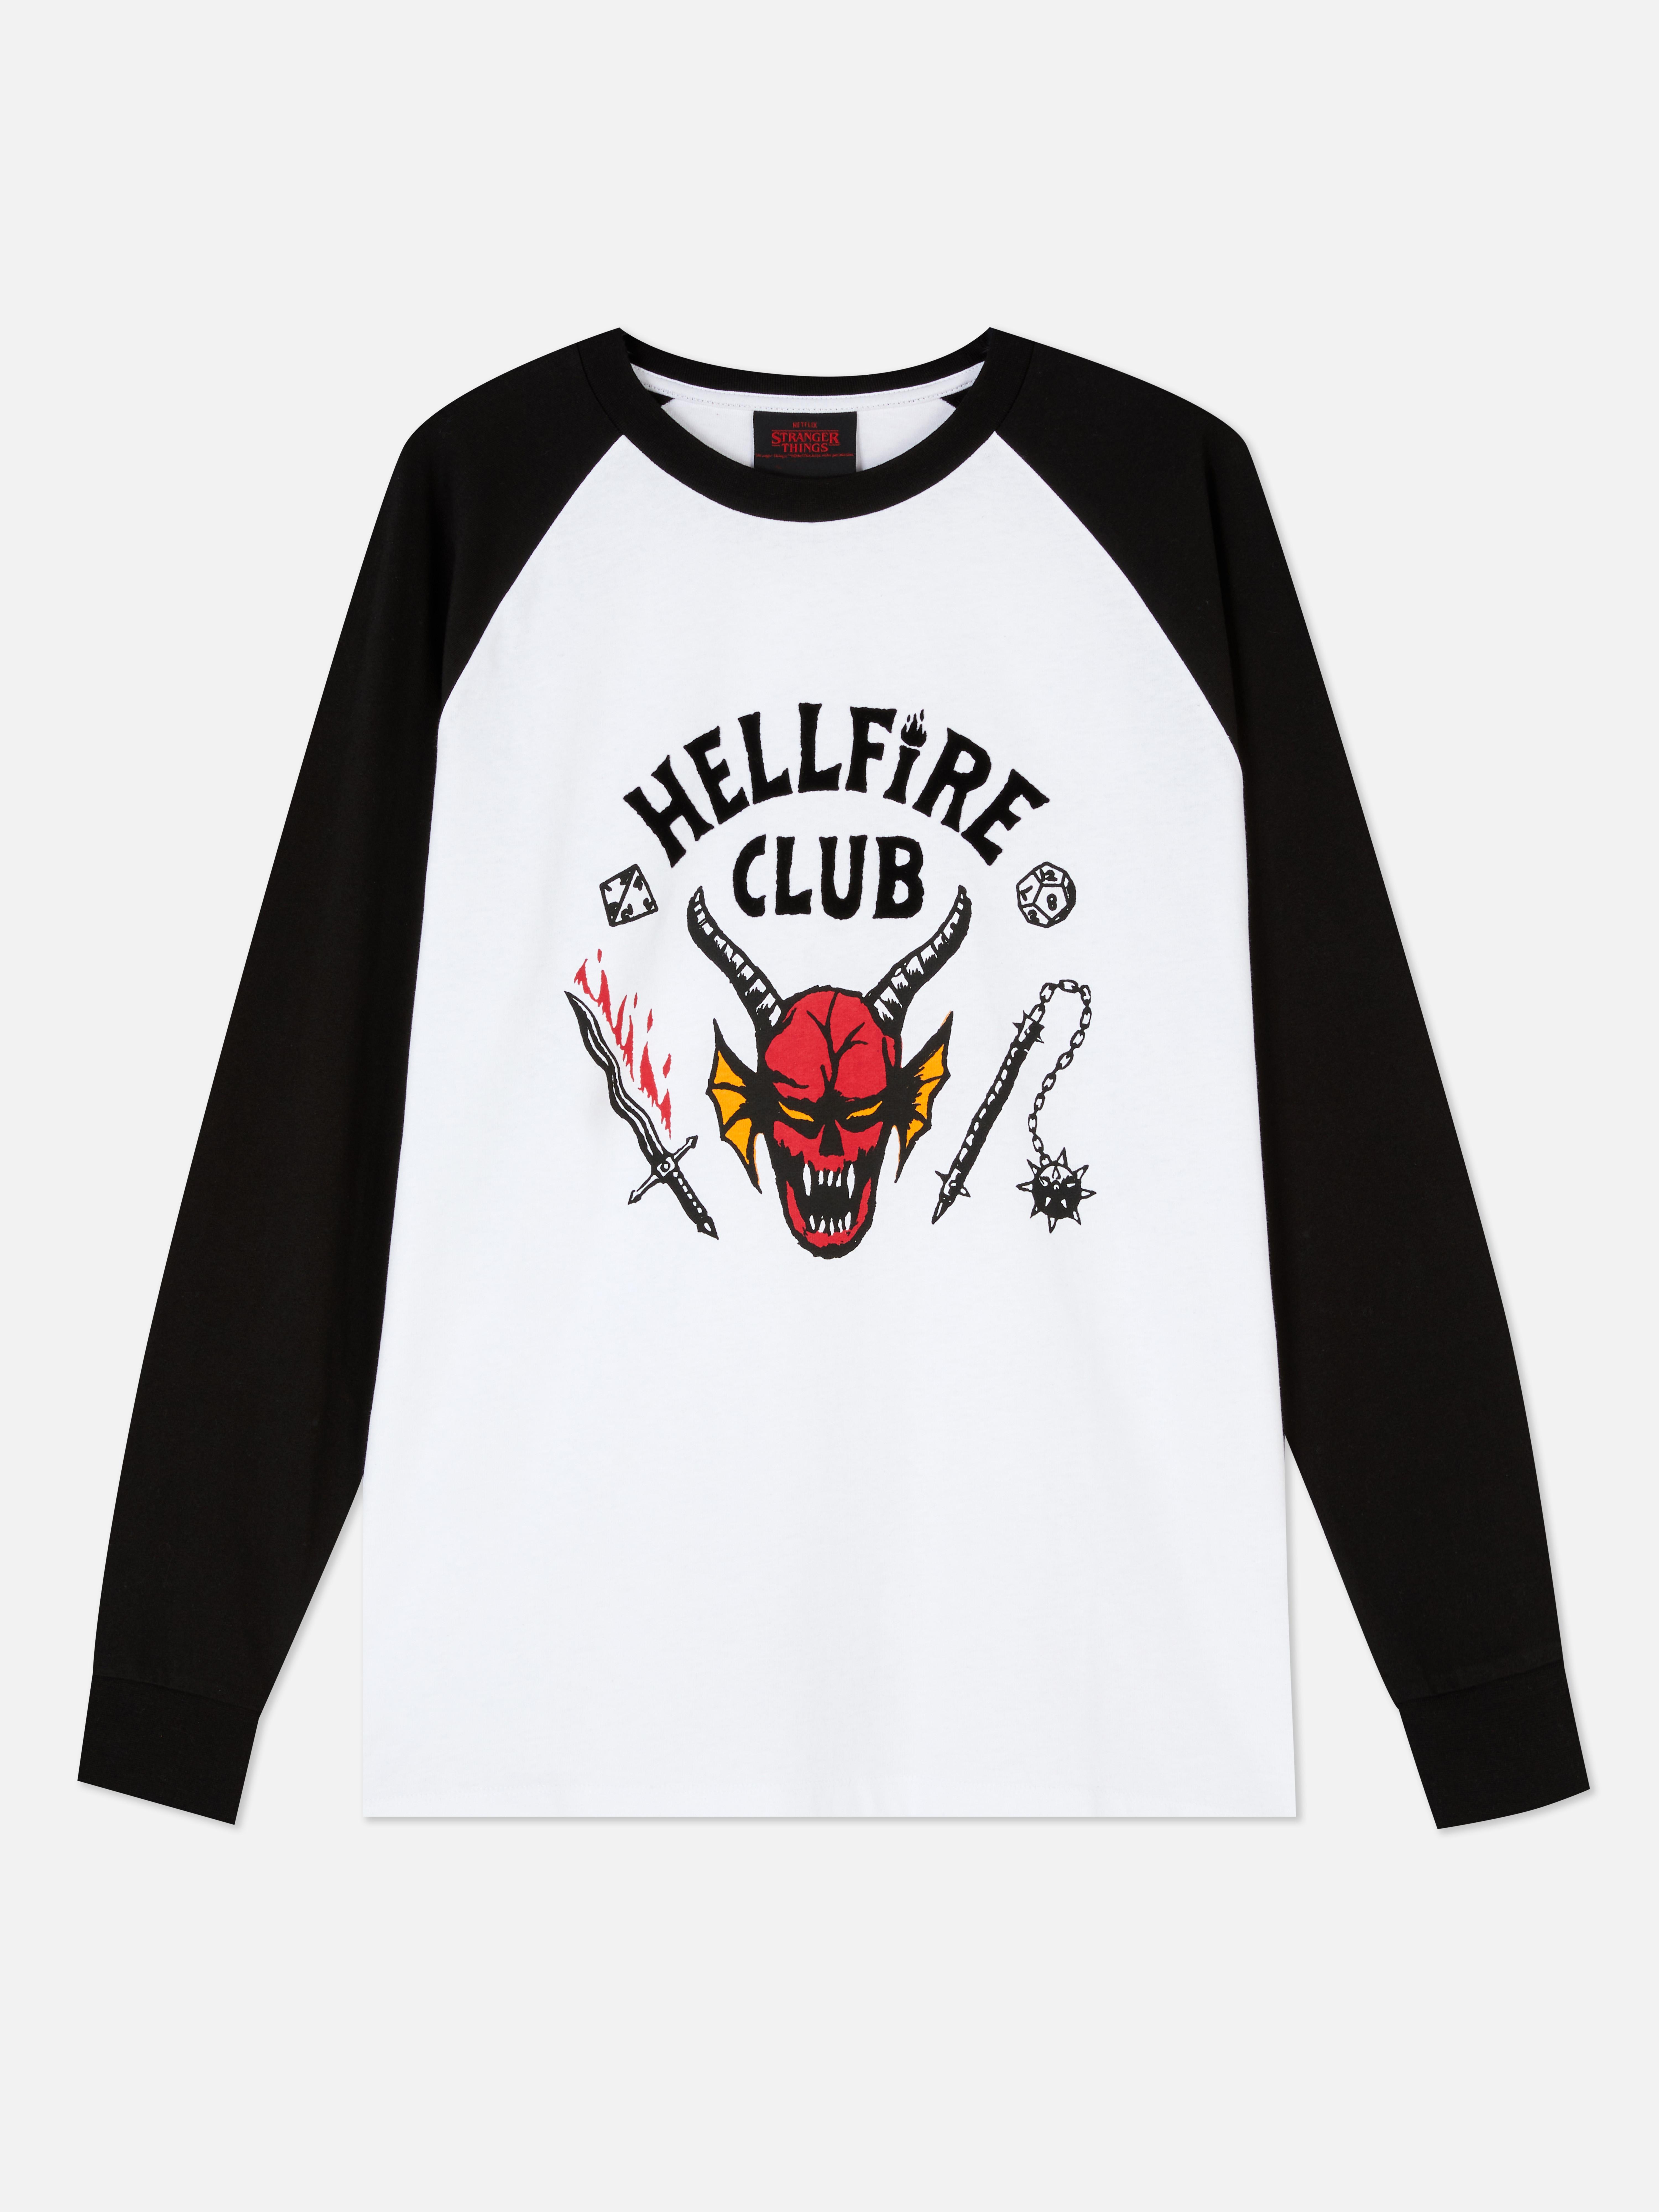 Stranger Things Hellfire Club Top | Men's Tees | Men's T-shirts & Tops  | Men's Style | Our Menswear Collections | All Primark Products | Primark